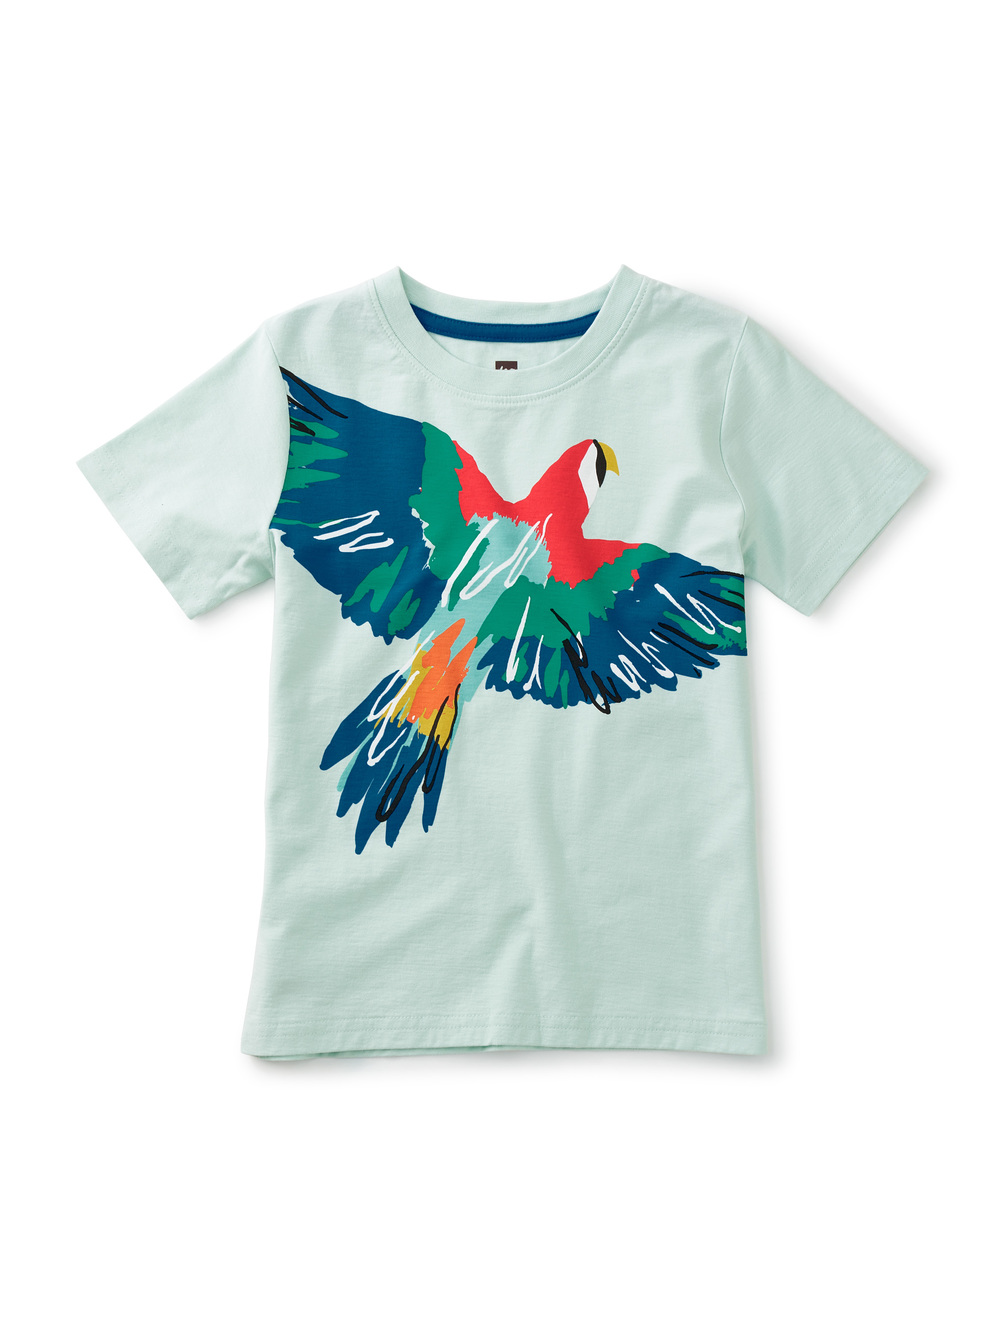 Parrot Party Graphic Tee